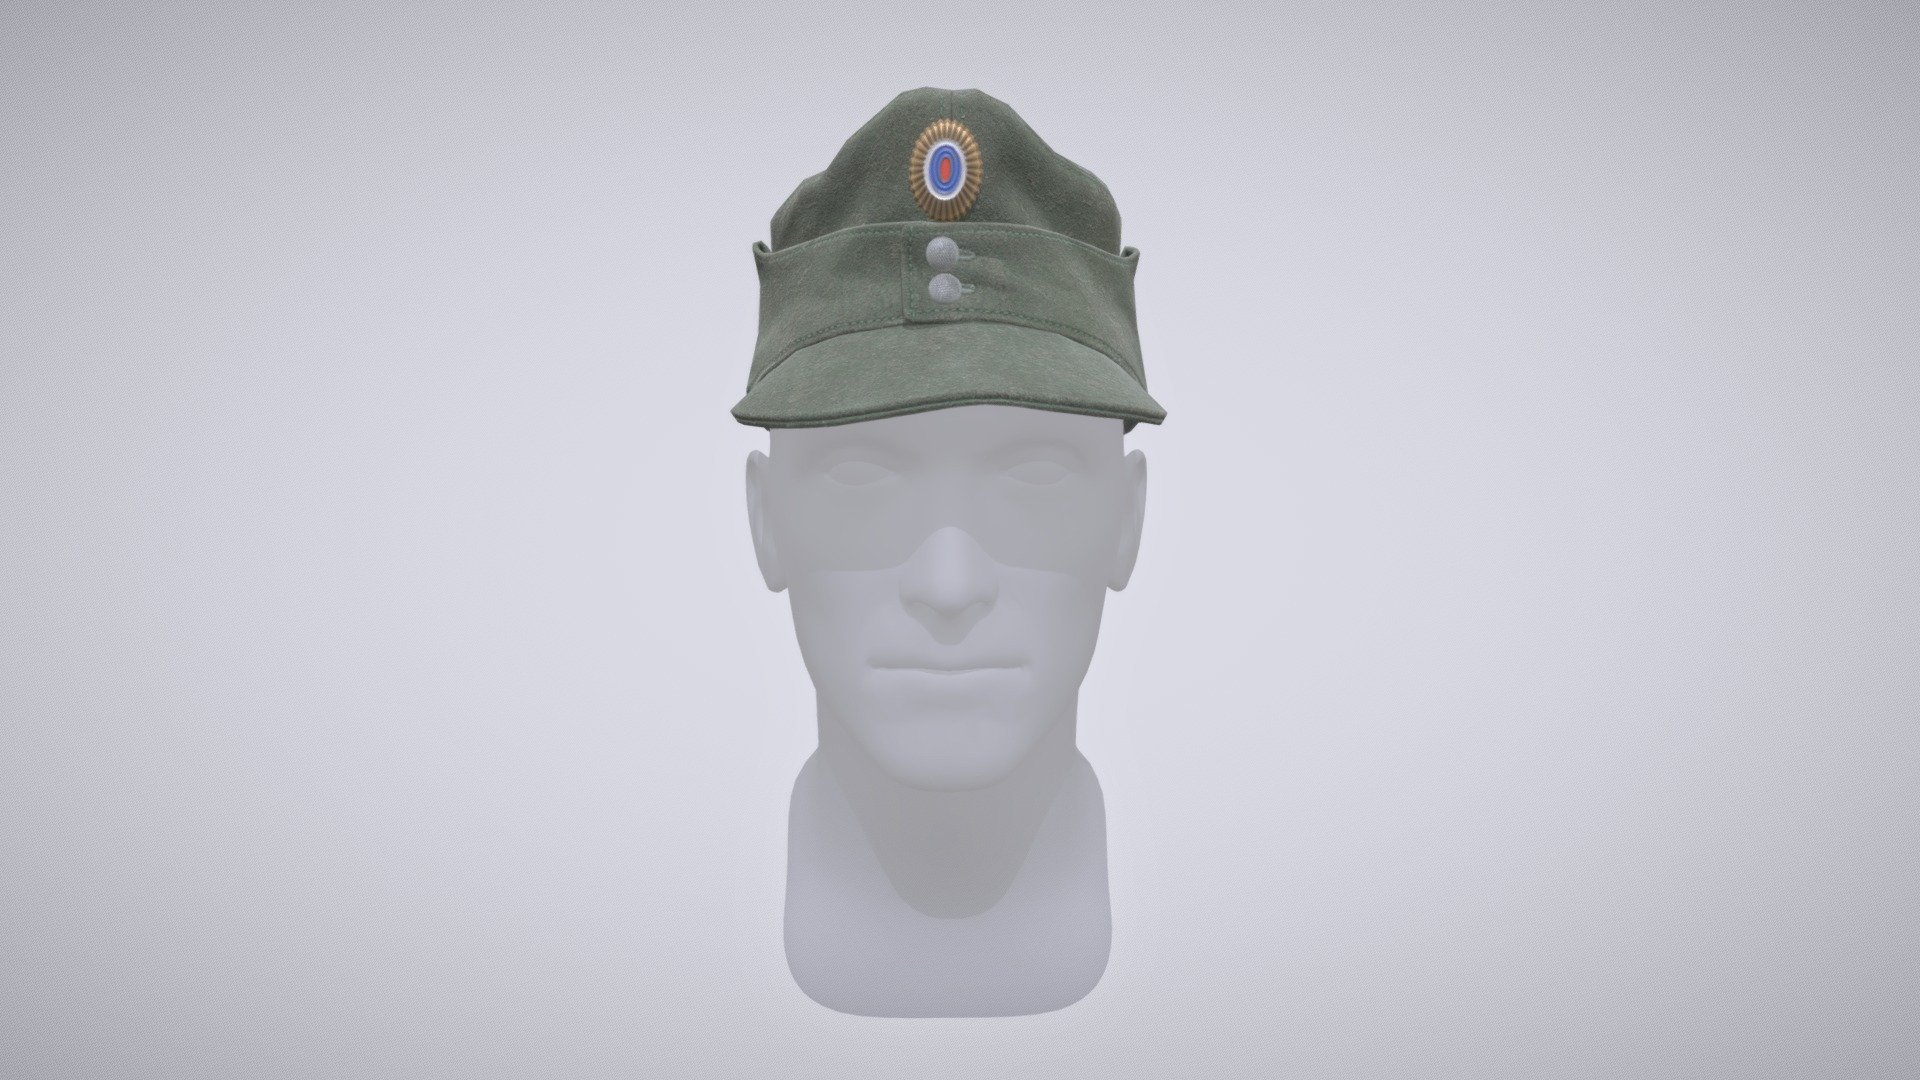 The ski cap is a type of field cap used by several German-speaking or German-influenced armed forces. The design originates from imperial Austria-Hungary, but is best known for its widespread use as M43 field cap (Einheitsmütze) used by the German Wehrmacht during World War II. There is a cap badge witch used by ost battalion 3d model